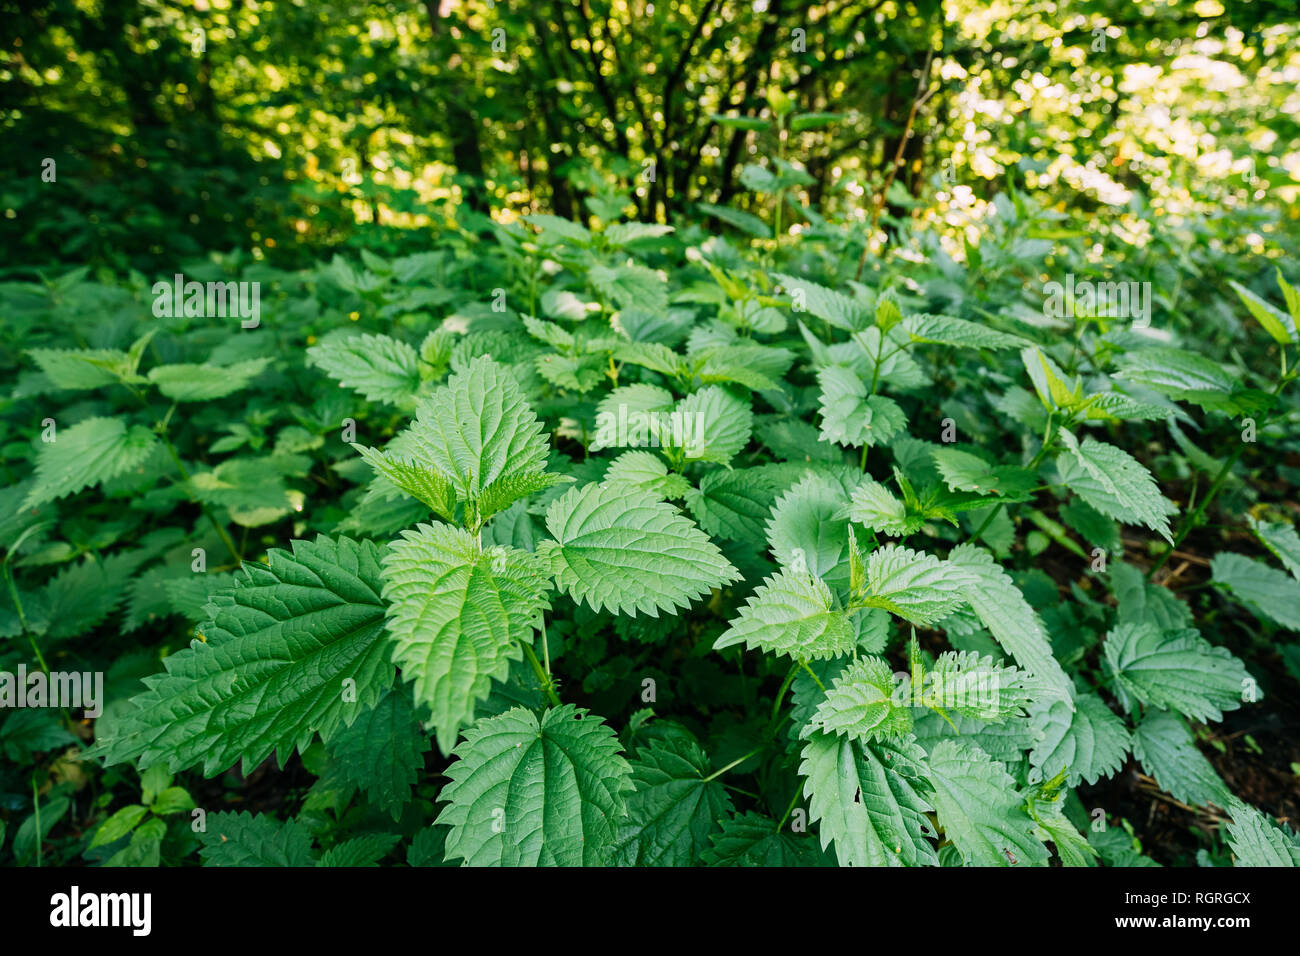 Twigs Of Wild Plant Nettle Or Stinging Nettle Or Urtica Dioica In Spring Meadow Stock Photo